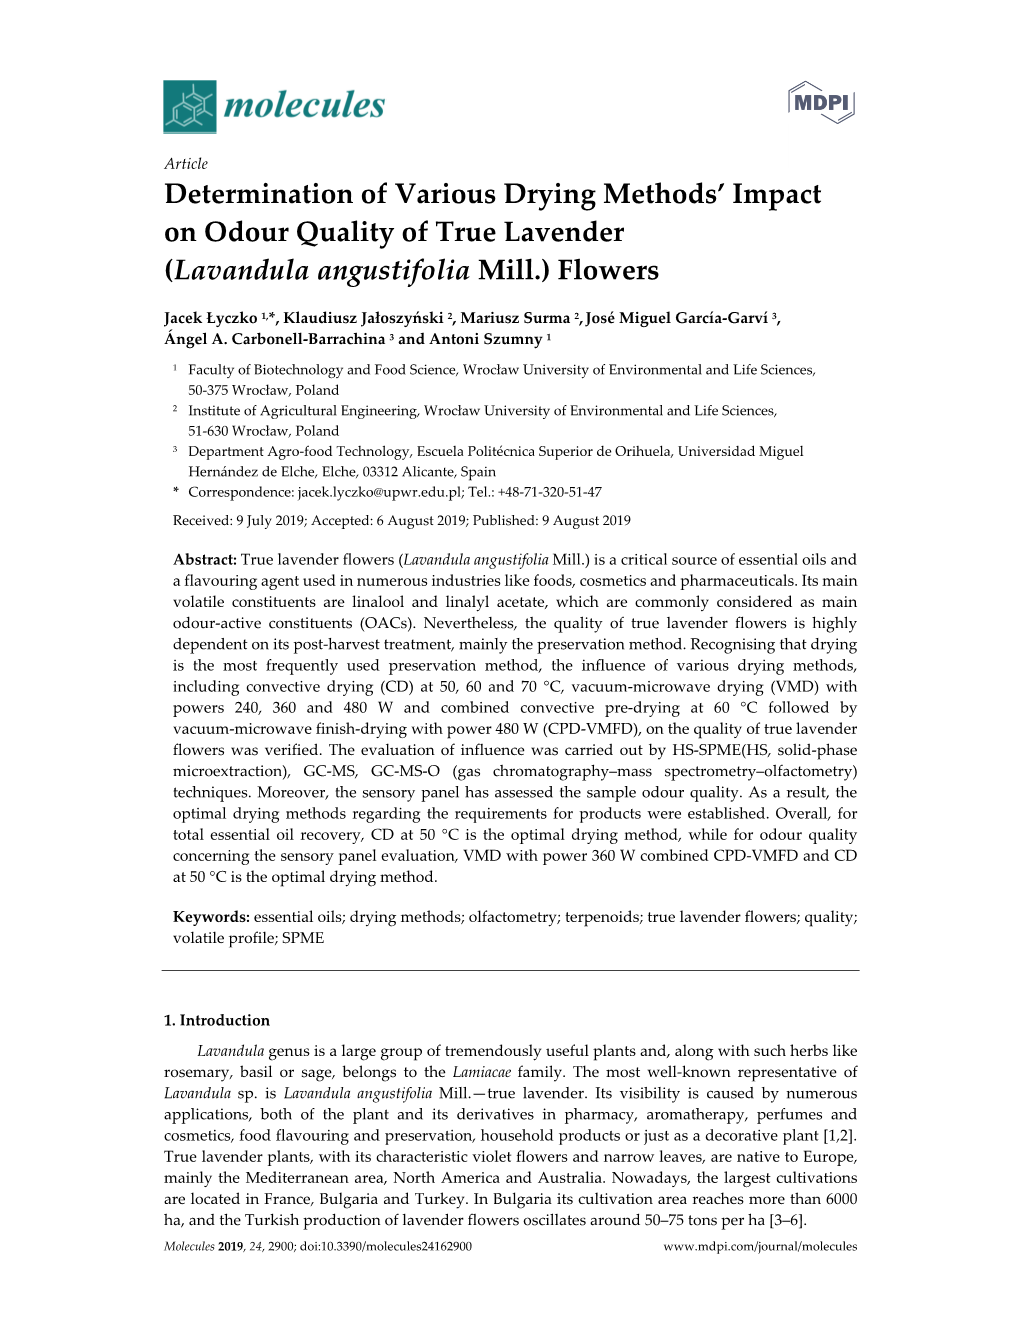 Determination of Various Drying Methods' Impact on Odour Quality of True Lavender (Lavandula Angustifolia Mill.) Flowers